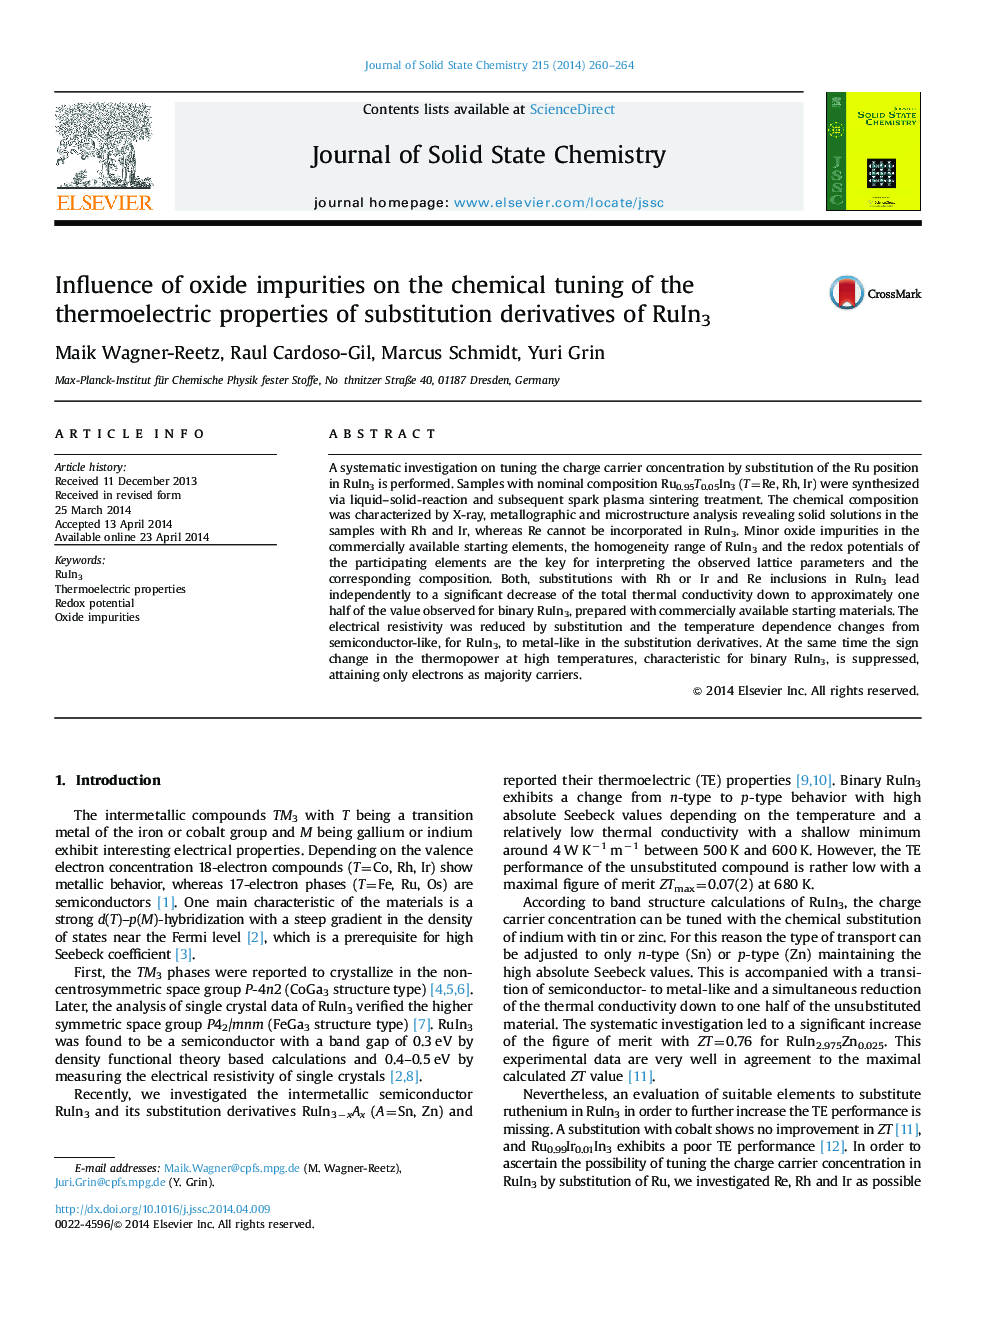 Influence of oxide impurities on the chemical tuning of the thermoelectric properties of substitution derivatives of RuIn3